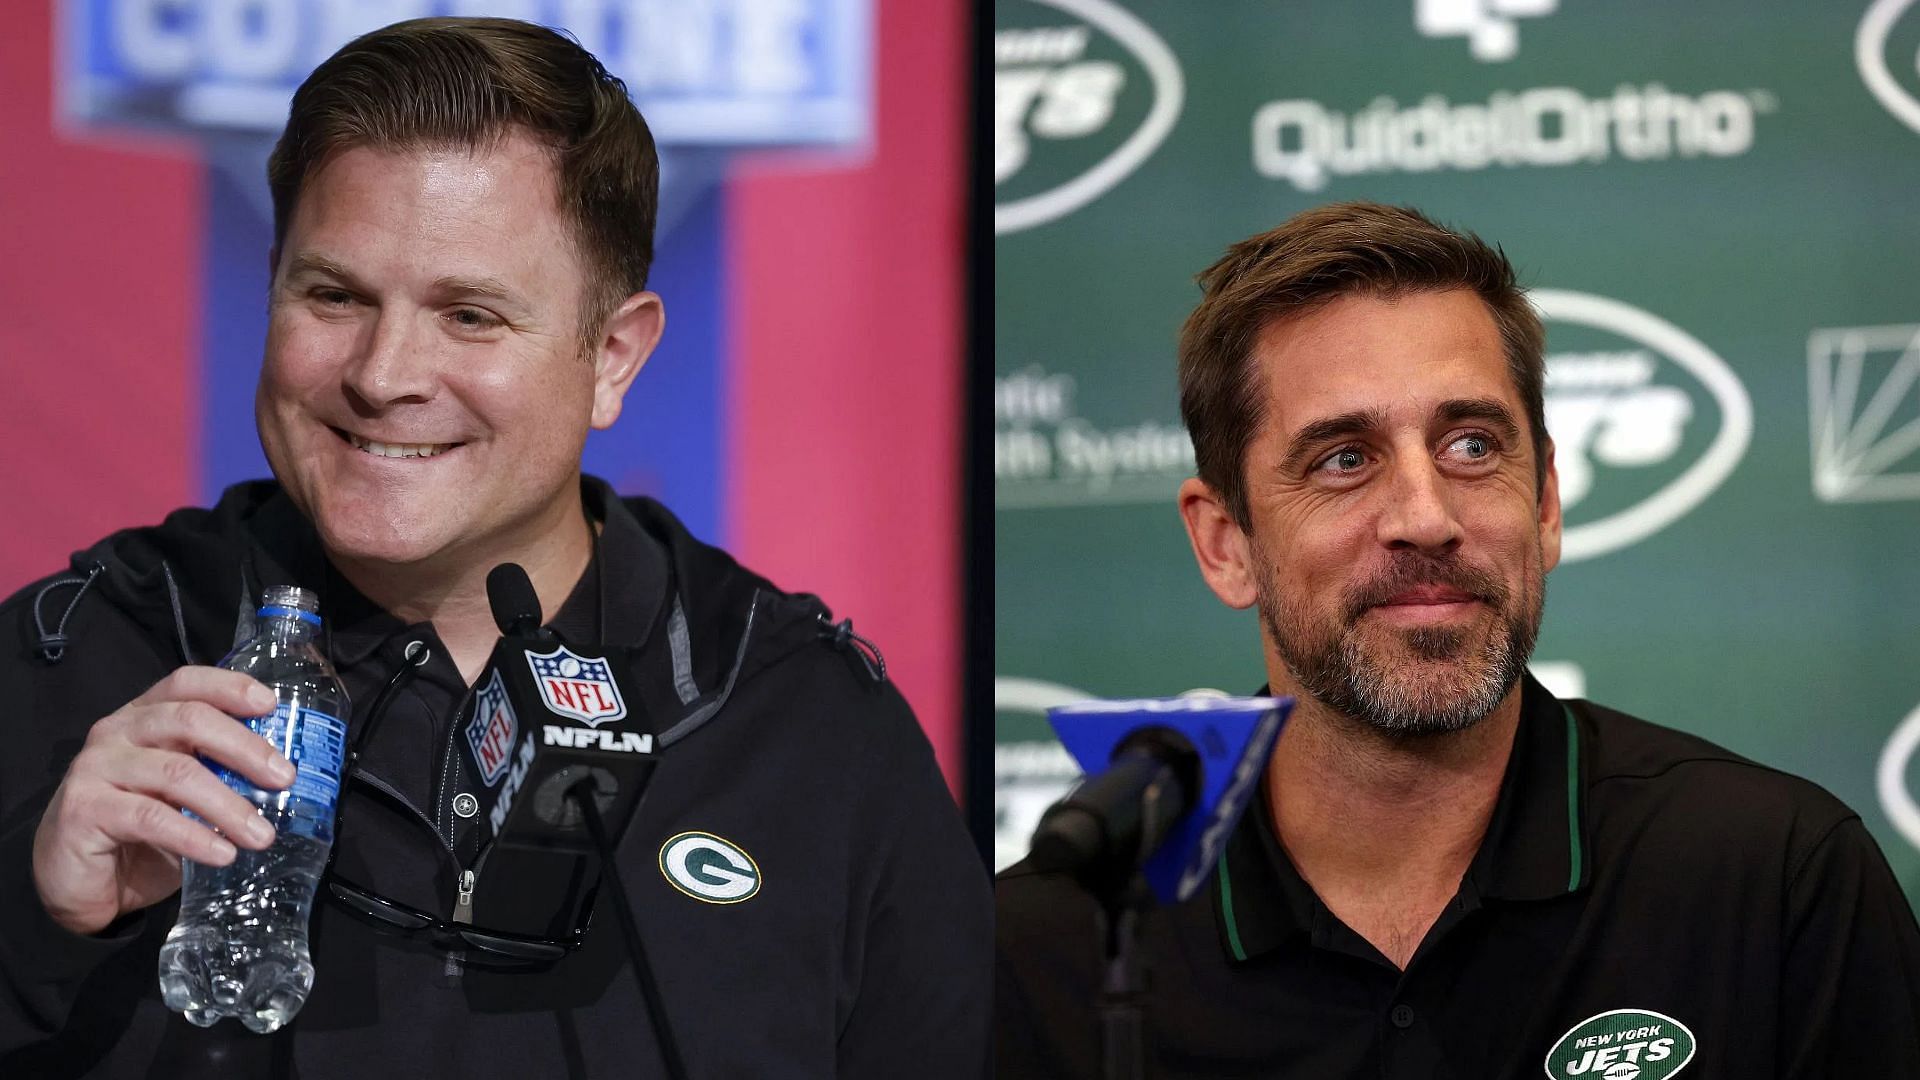 Jets fans have defended Aaron Rodgers over harsh truth about Packers GM.